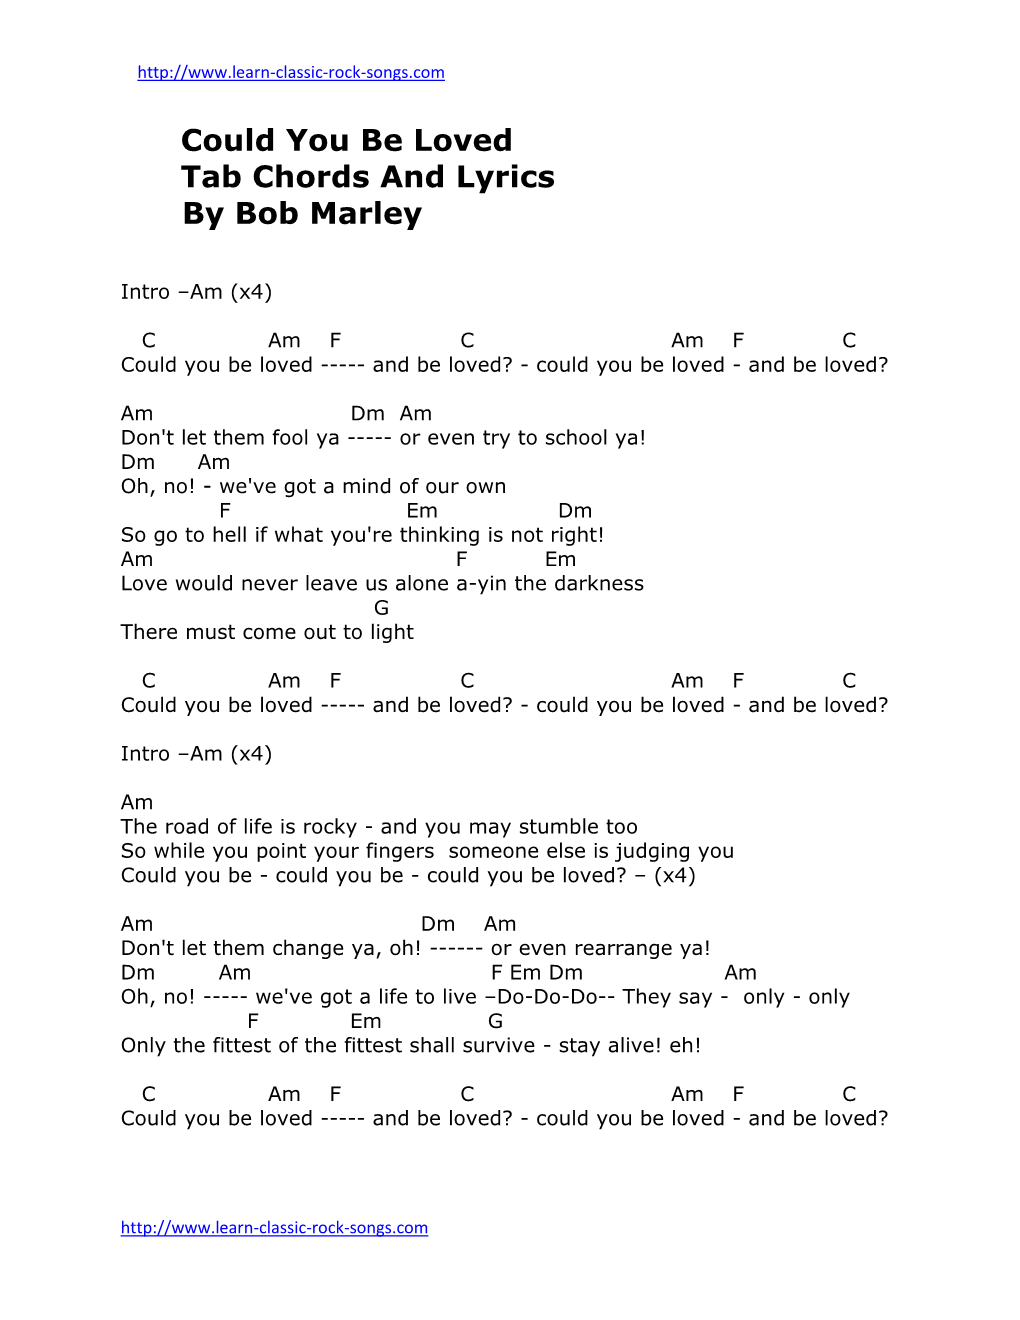 Could You Be Loved Tab Chords and Lyrics by Bob Marley